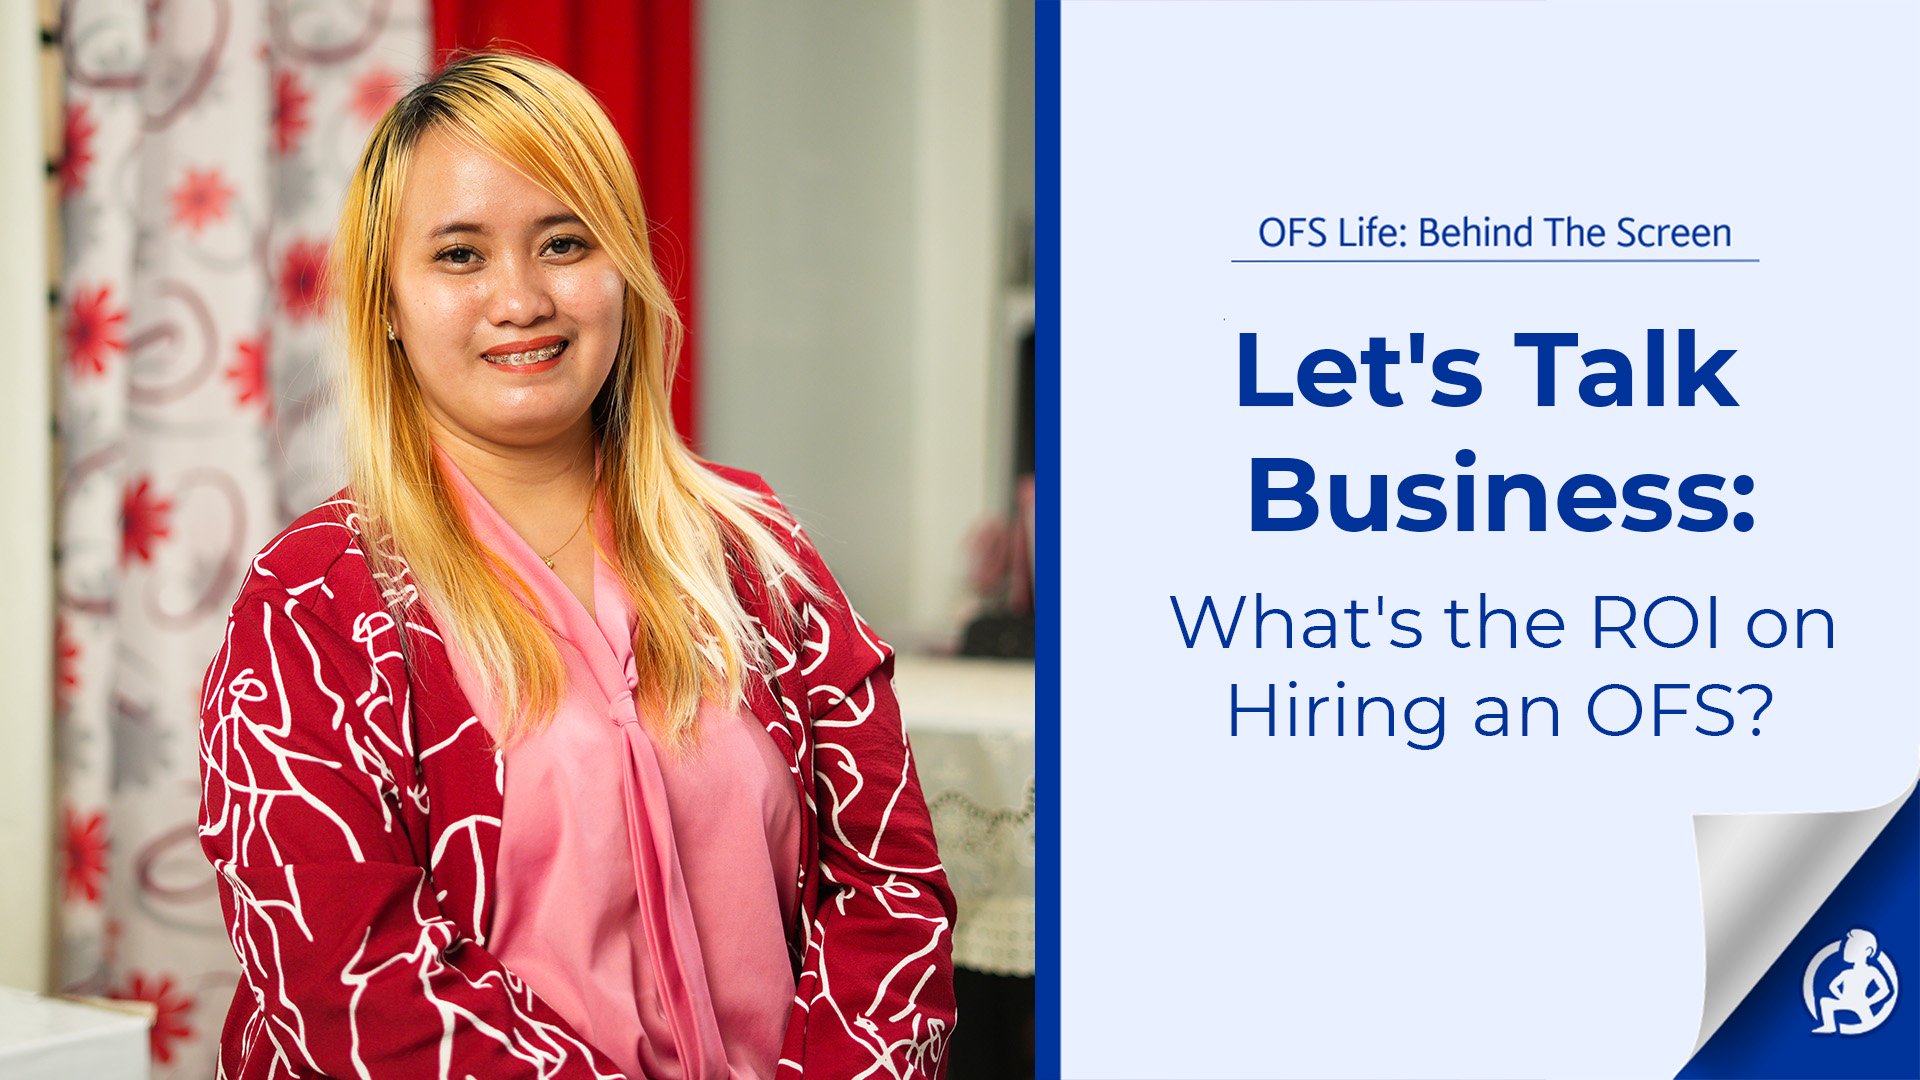 Let’s Talk Business: What’s the ROI on Hiring an OFS?